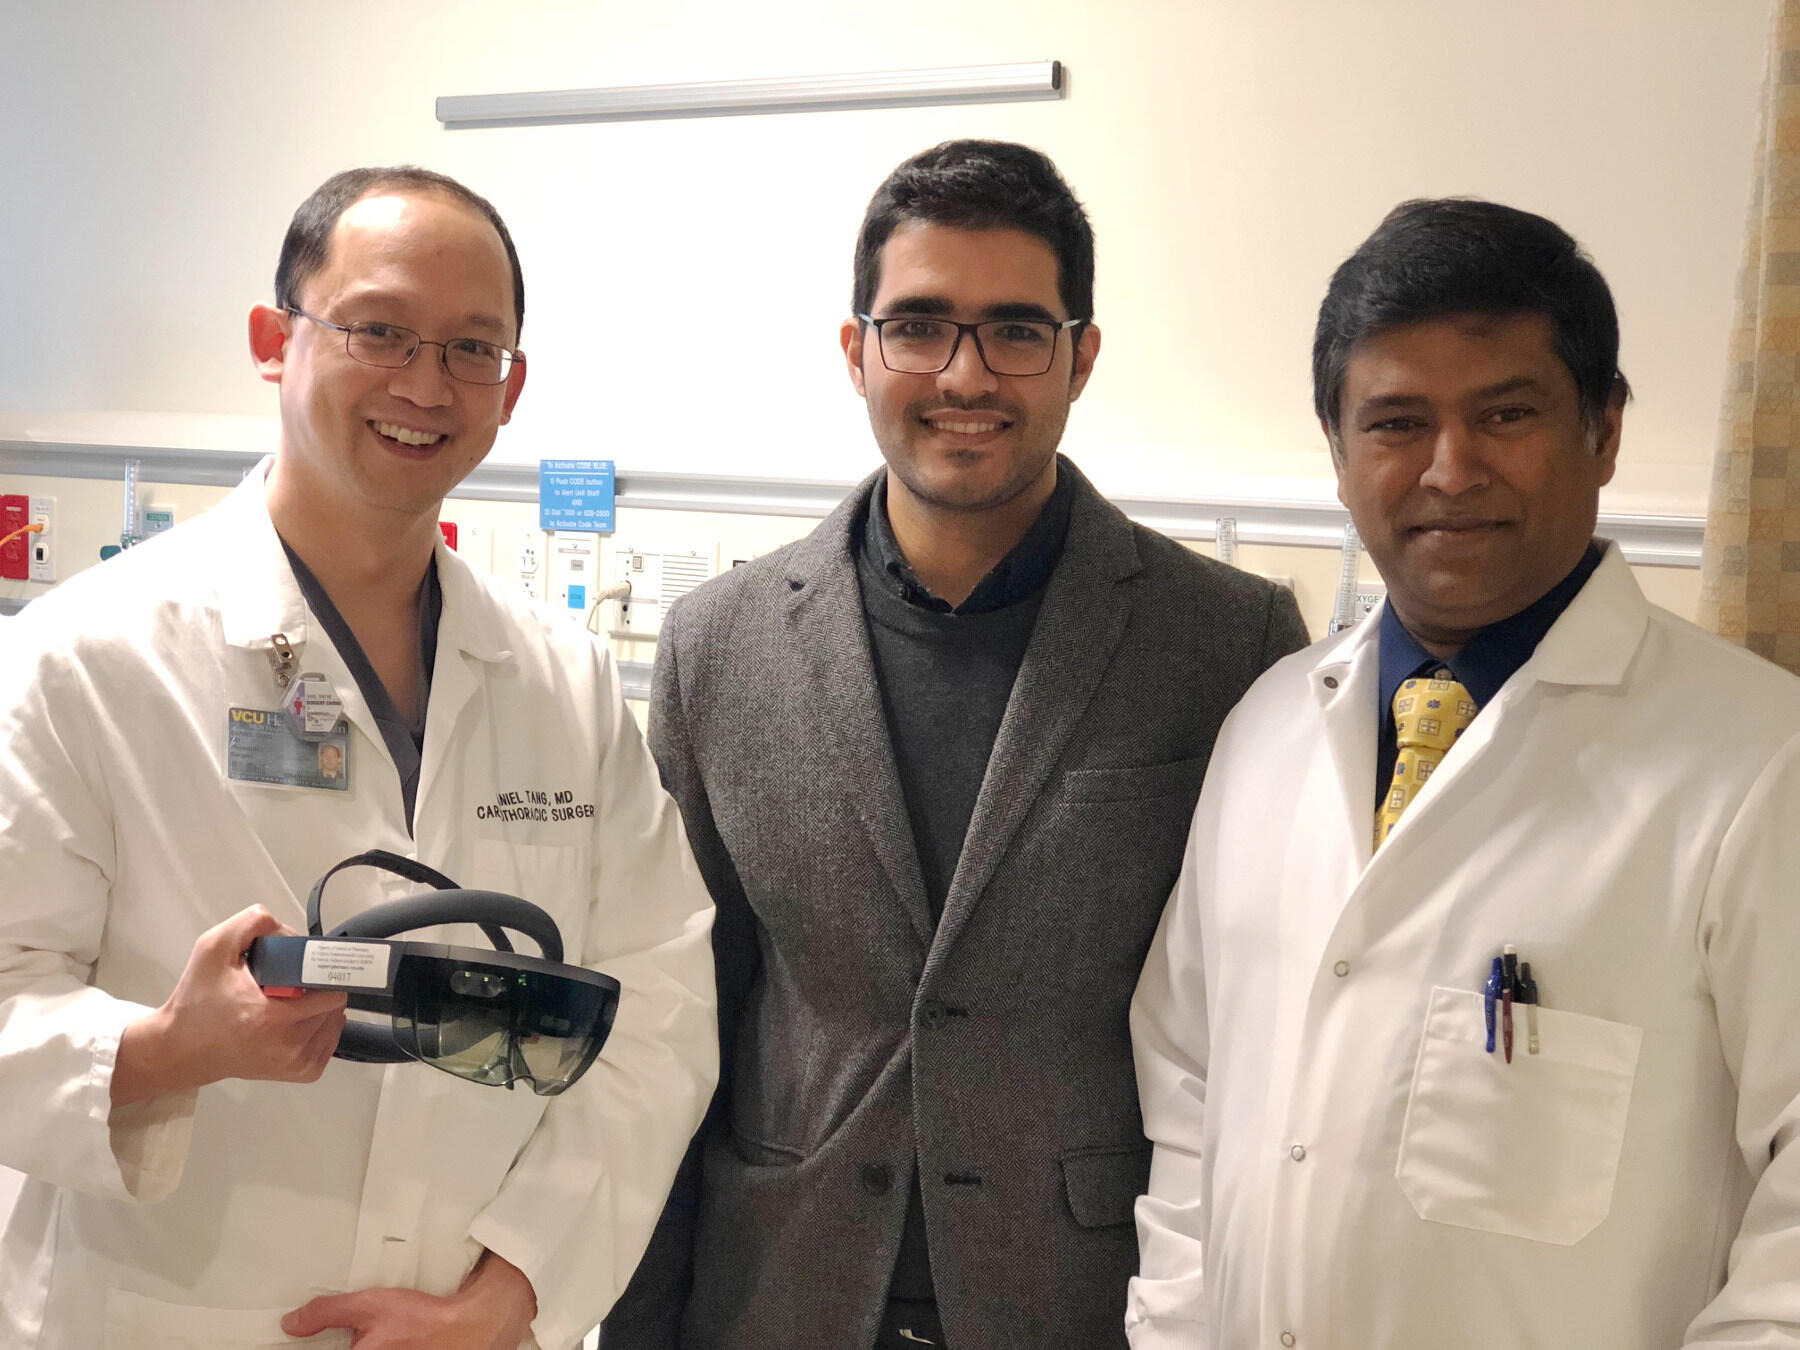 Dan Tang, M.D., Ali Panahi, computer sciences graduate student, and Dayanjan “Shanaka” Wijesinghe, Ph.D., have worked together to develop AR technology for medical use.